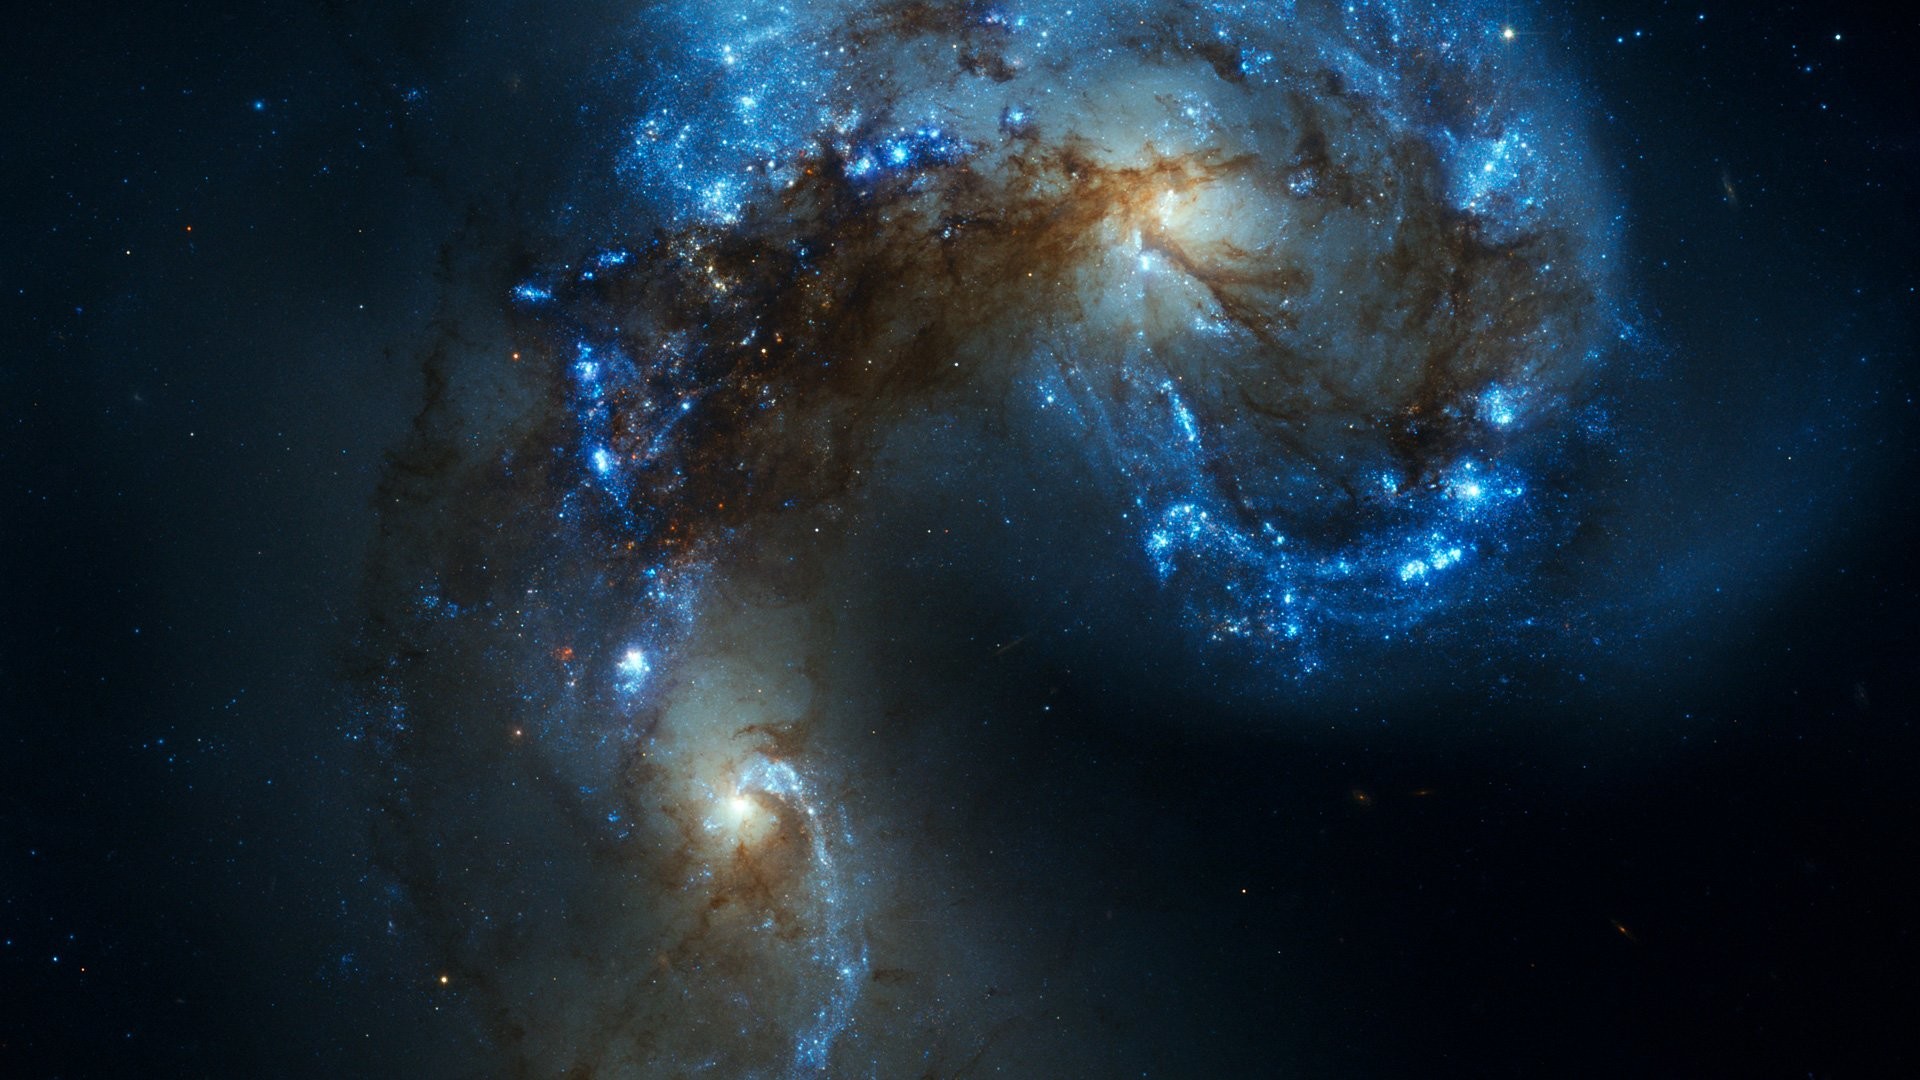 Space outer universe stars photography detail astronomy nasa hubble  wallpaper | | 670092 | WallpaperUP